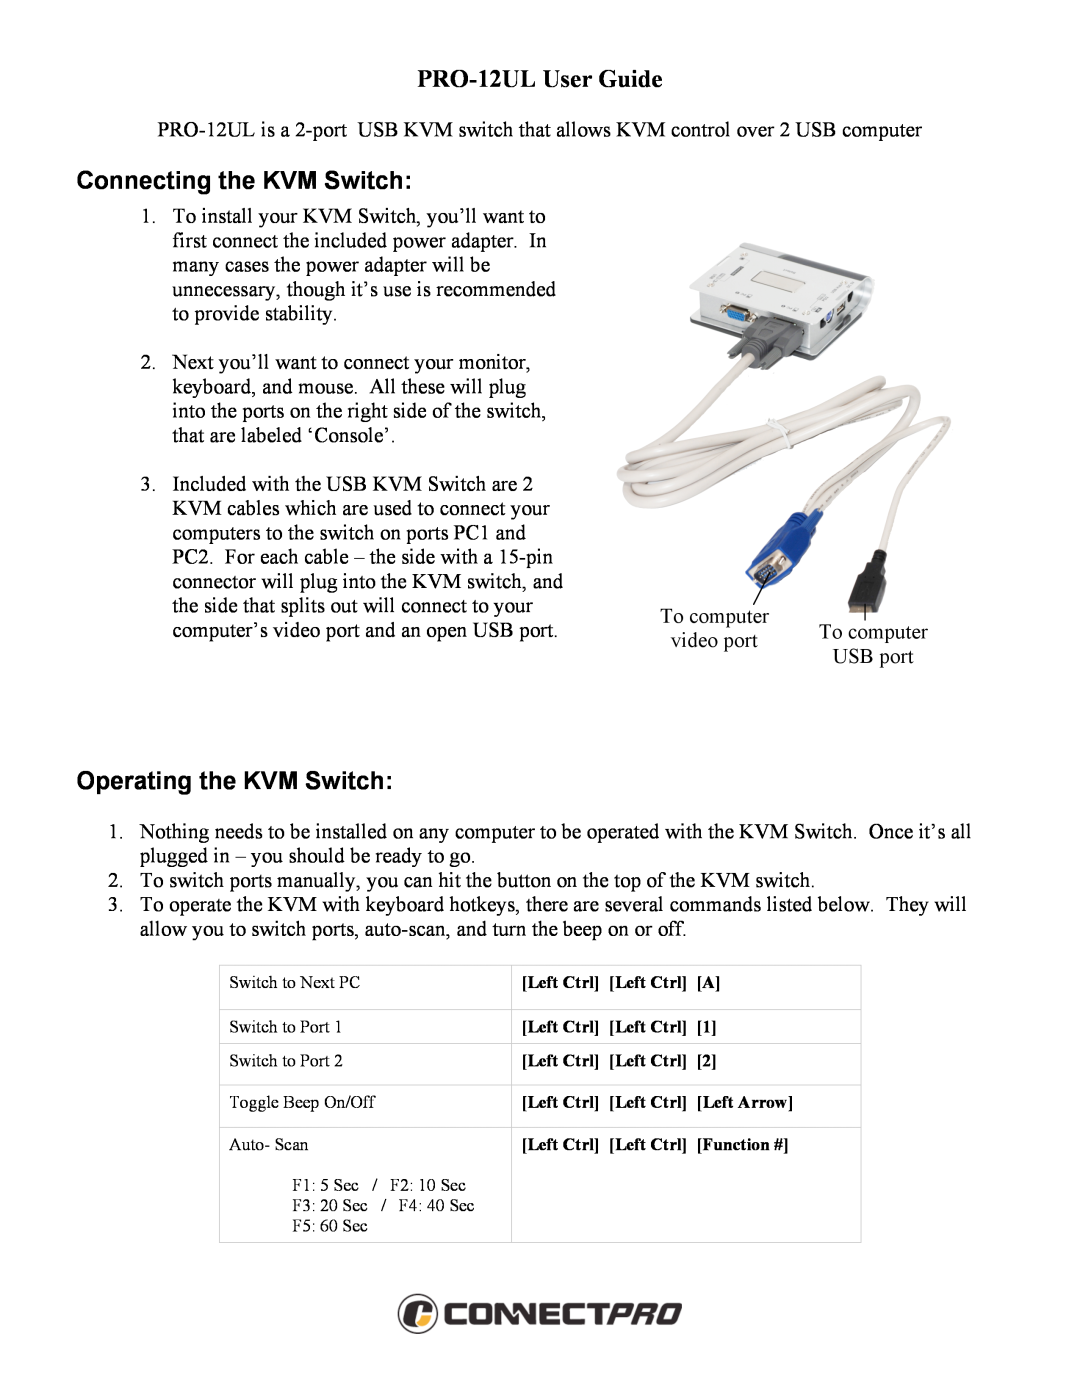 ConnectPRO manual PRO-12UL User Guide, Connecting the KVM Switch, Operating the KVM Switch 